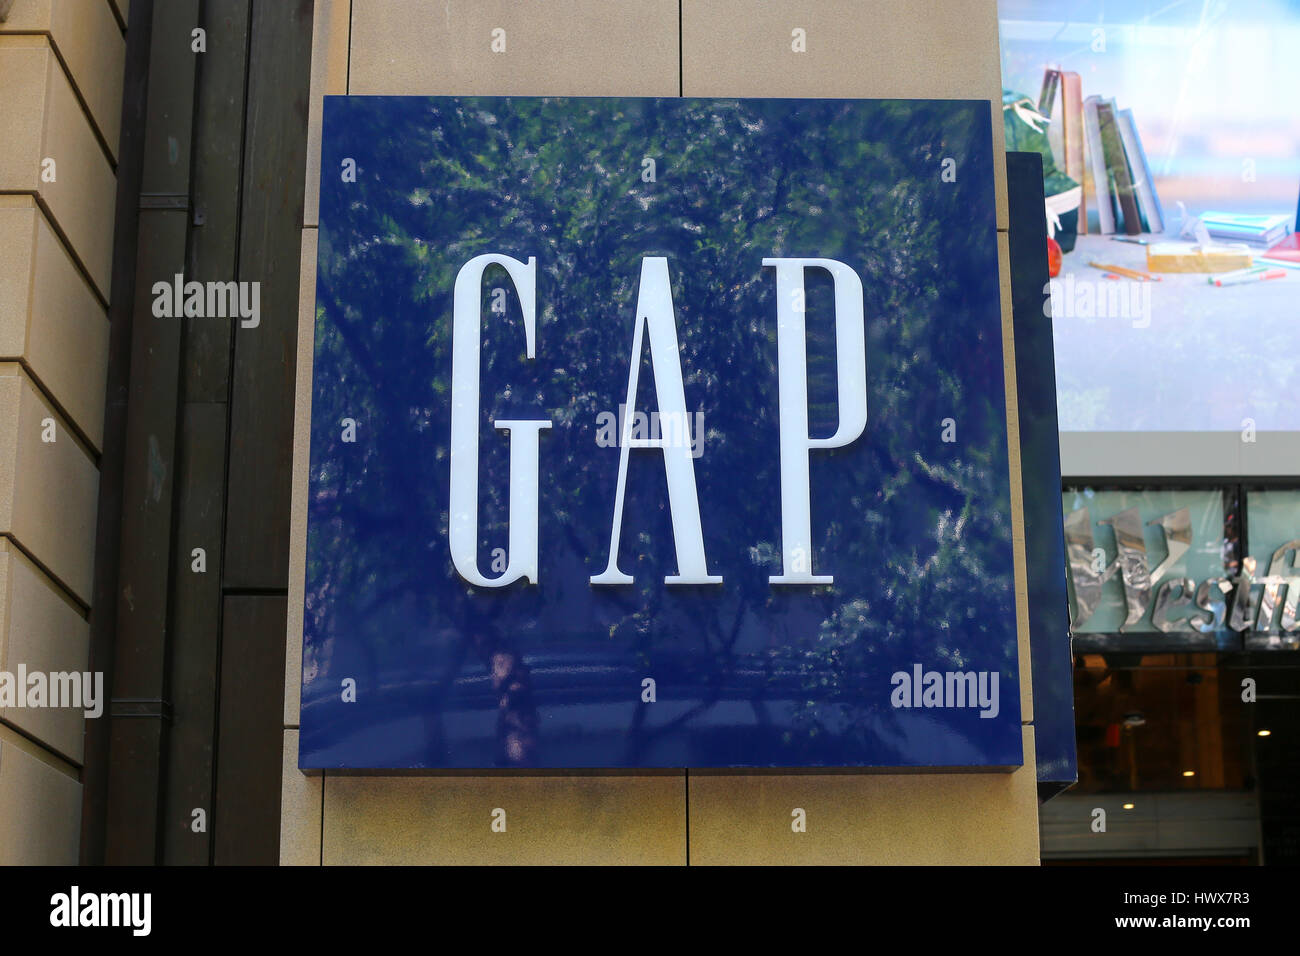 SYDNEY, AUSTRALIA - JANUARY 23, 2017: Detail of Gap store in Sydney, Australia. Gap is an American multinational clothing and accessories retailer,  f Stock Photo